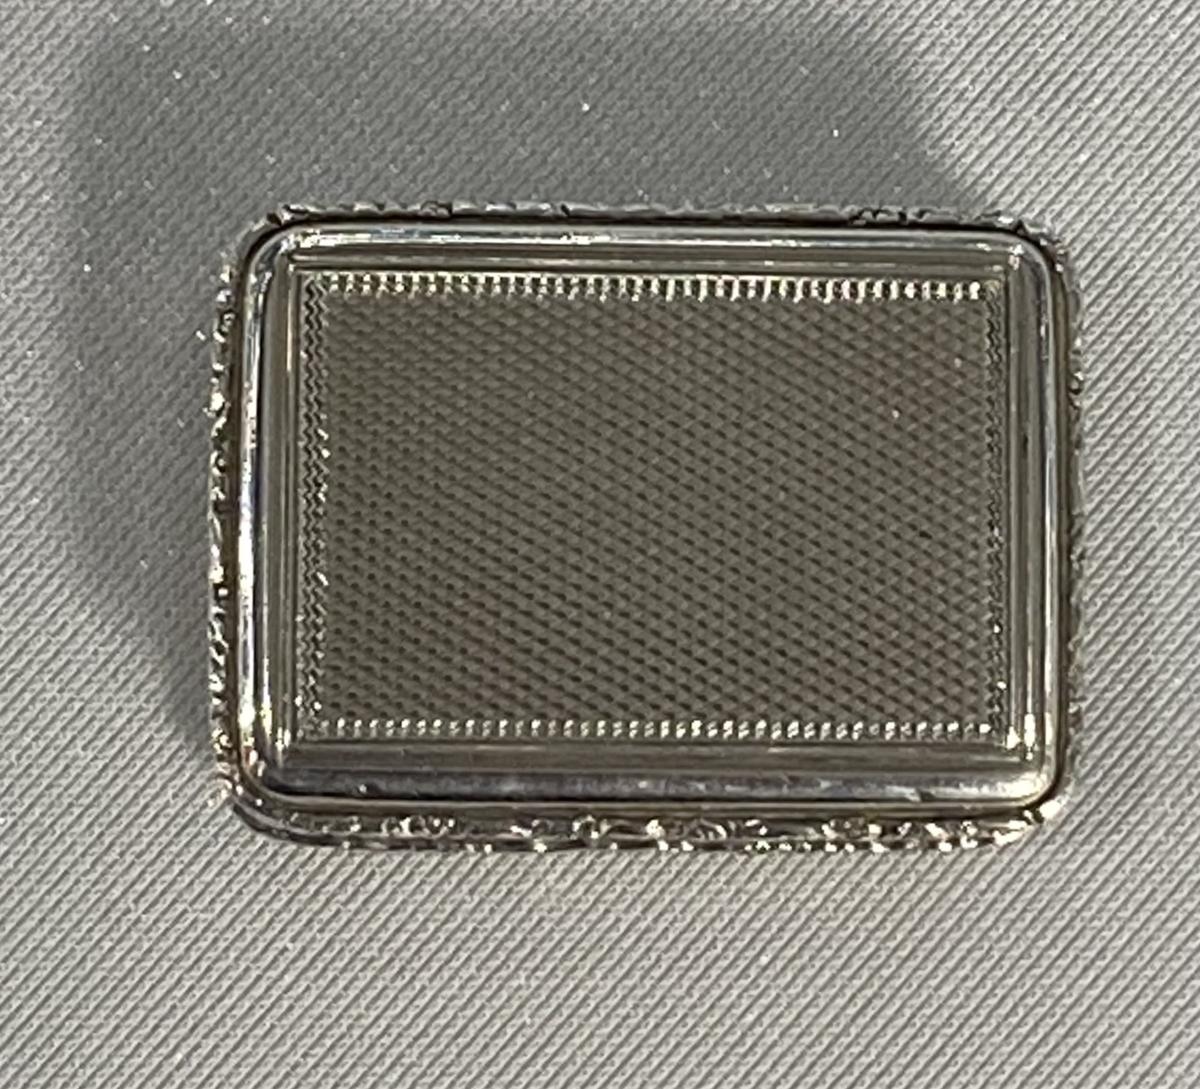 Thomas Edwards Quill pen and Book silver vinaigrette 1831